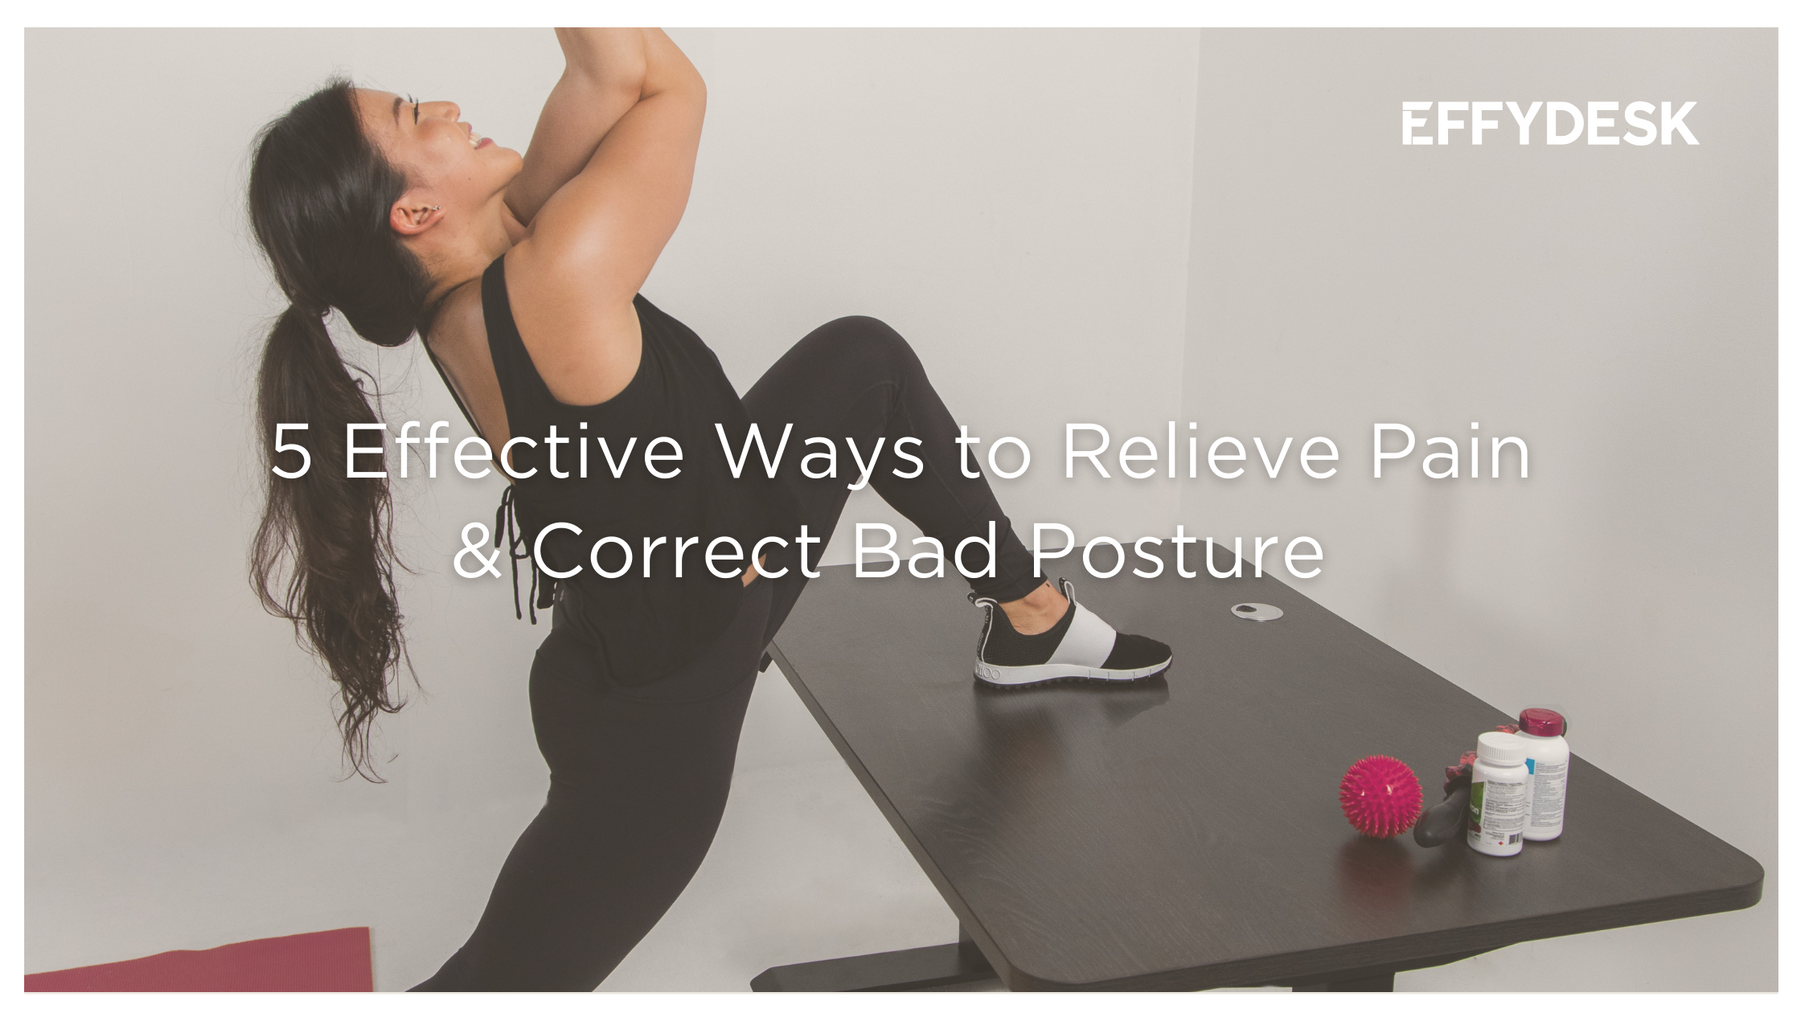 5 Effective Ways to Fix Bad Posture from Your Home Office